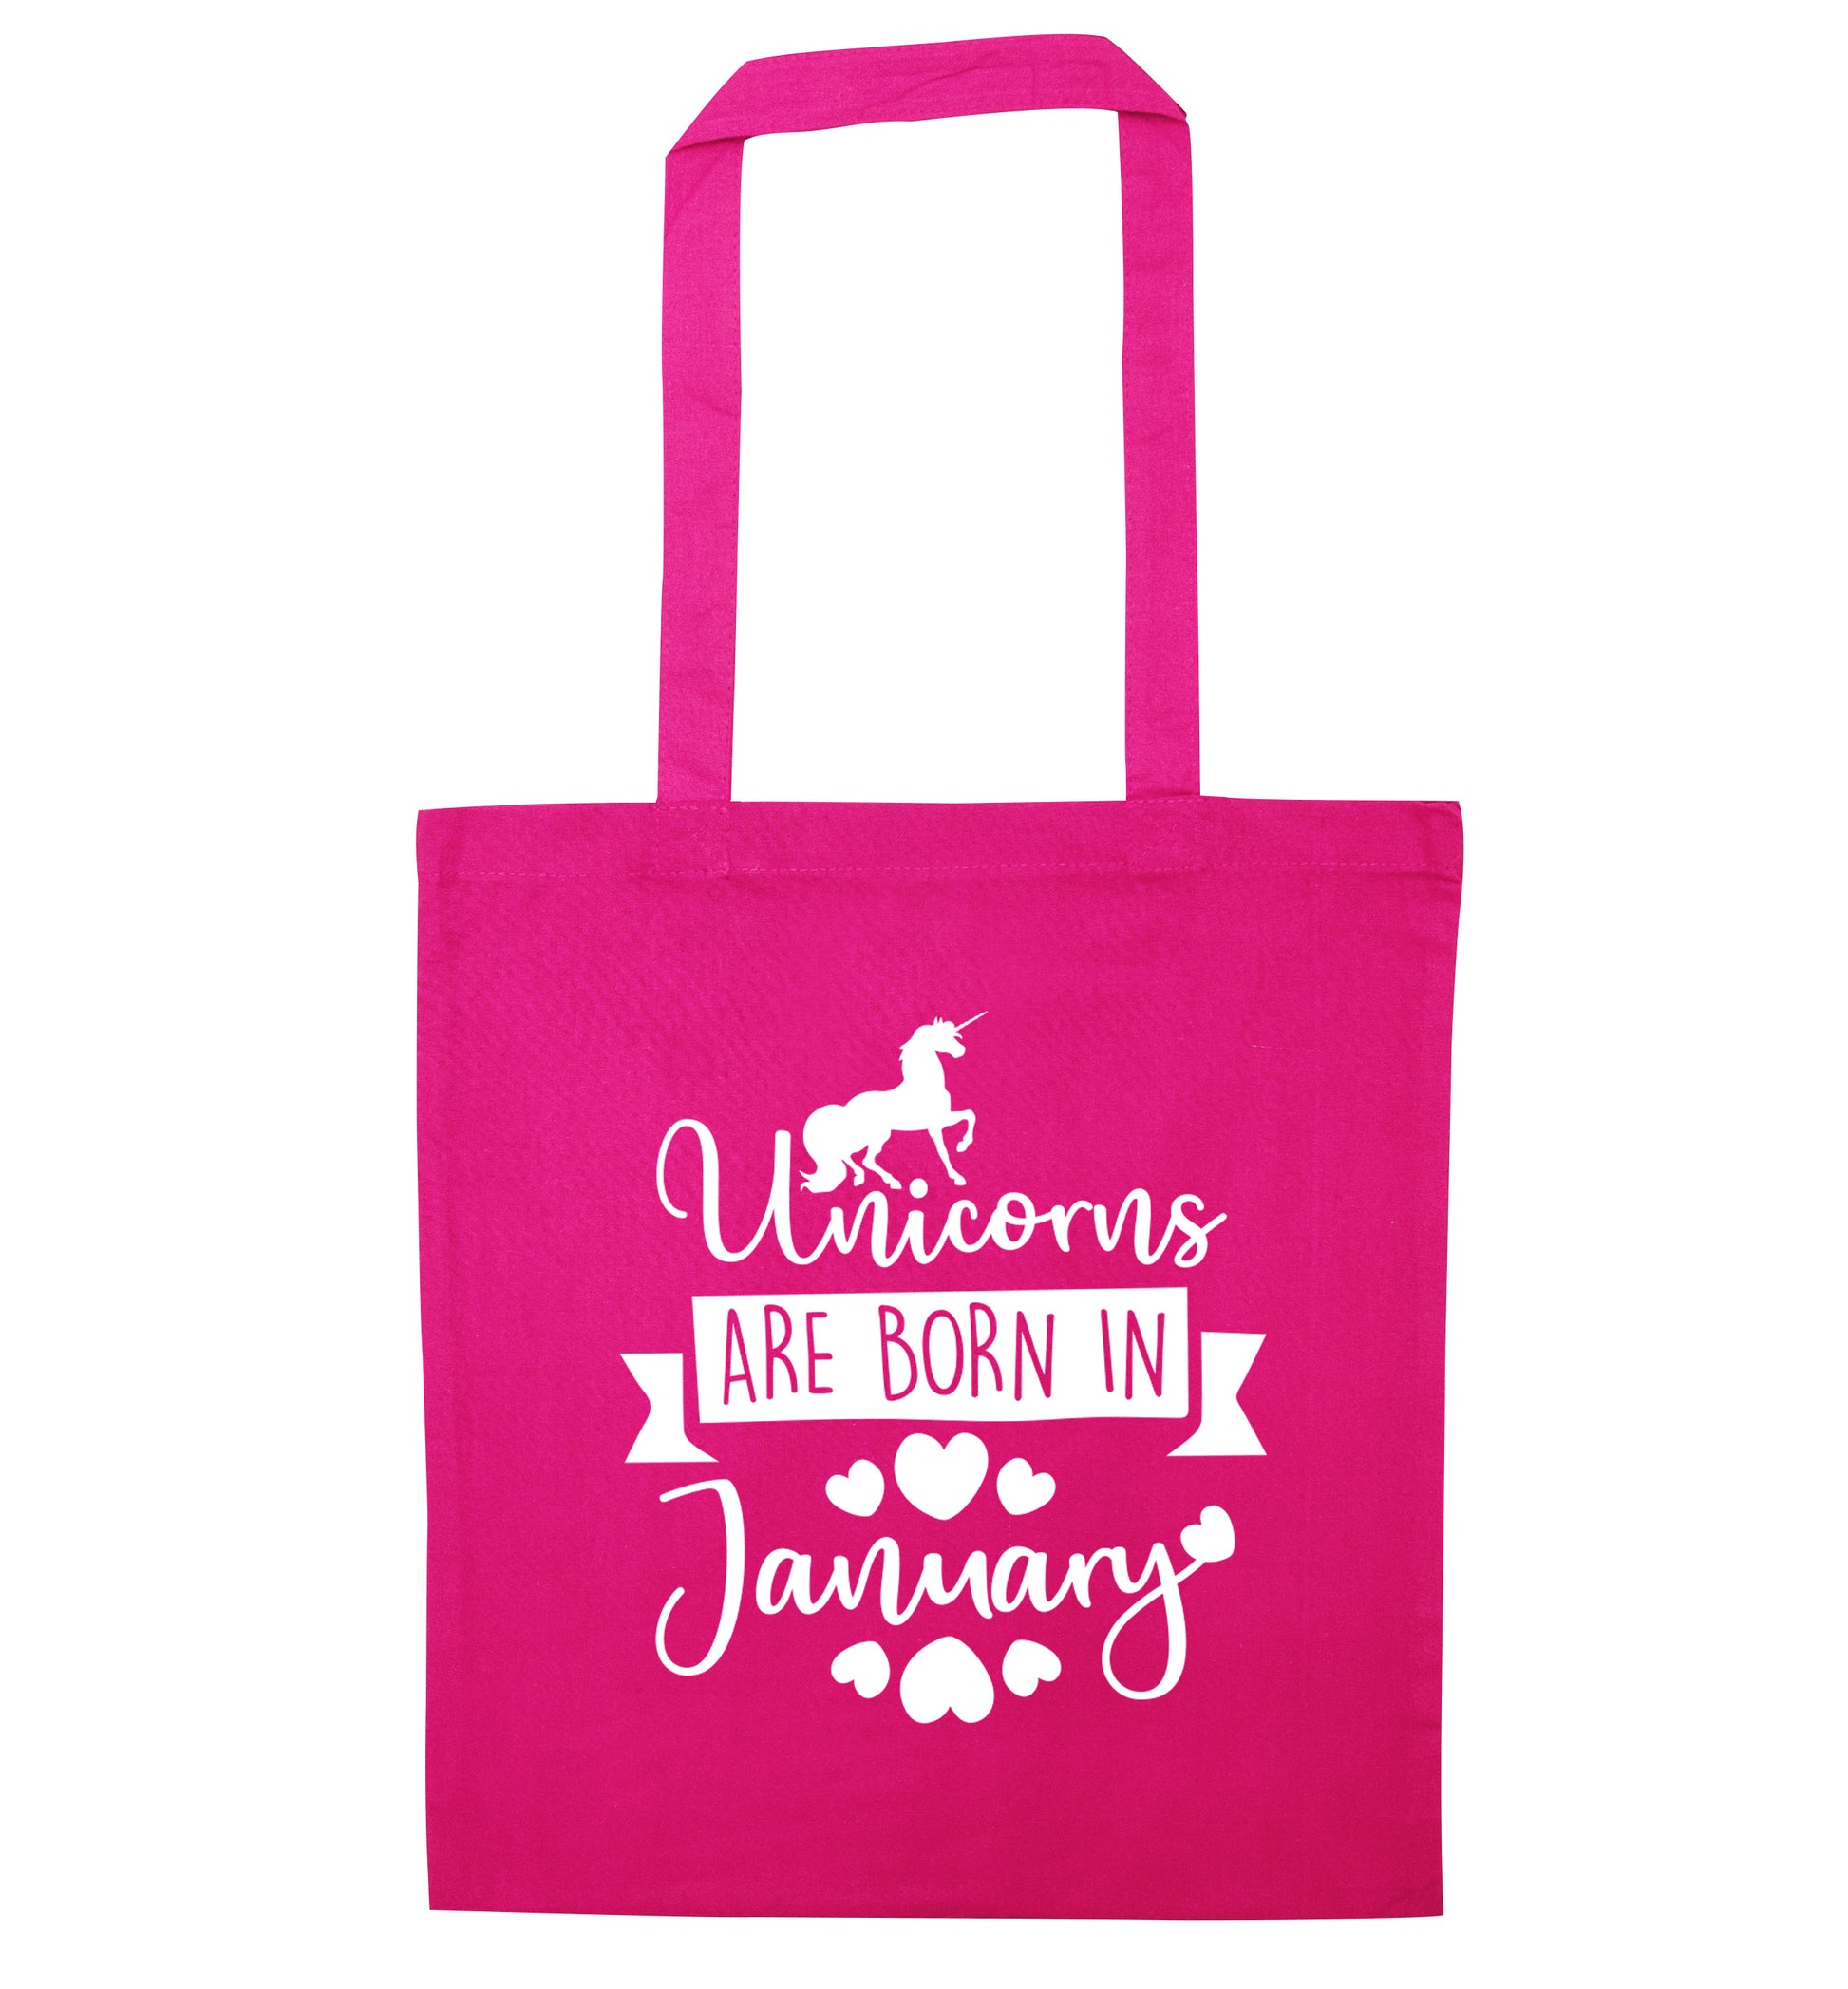 Unicorns are born in January pink tote bag